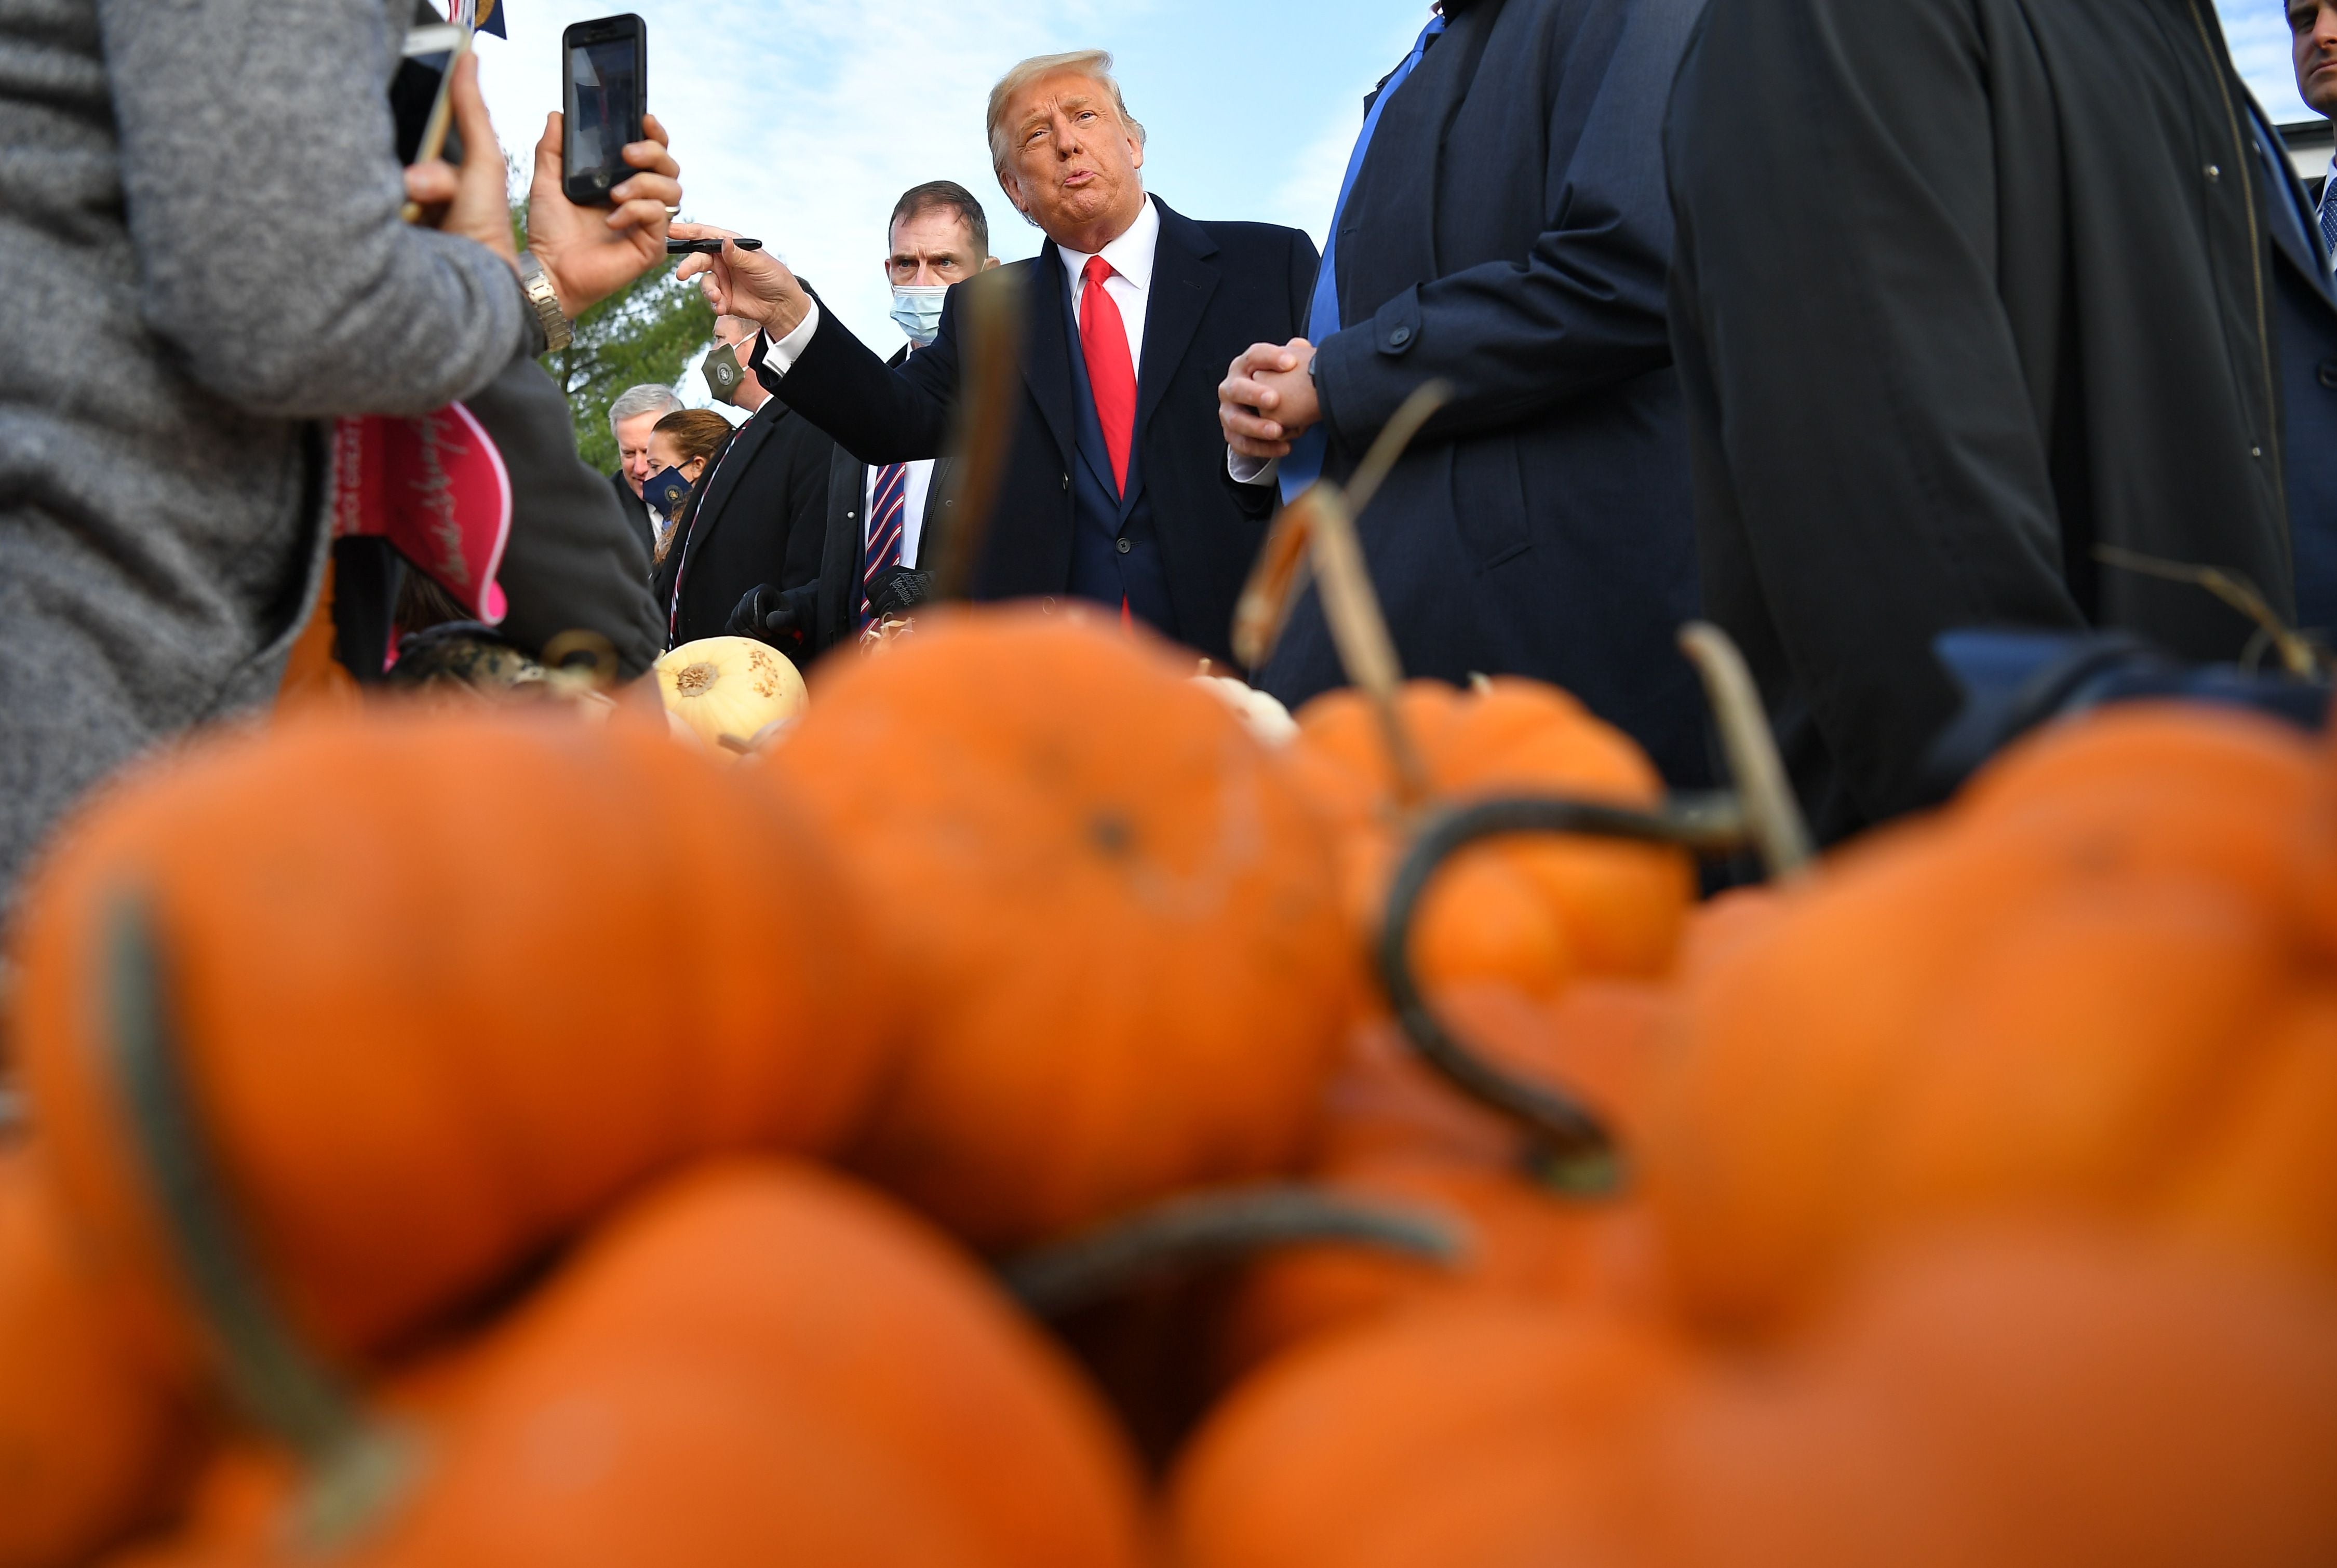 US President Donald Trump(C) signs hats as he meets with people at Treworgy Orchards during a campaign stop in Levant, Maine on October 25, 2020. - In a single day, he covered more than 3,000 kilometers (1,800 miles) aboard Air Force One, hitting three different campaign rallies from the country's south to the midwest. And Donald Trump has shown his willingness to keep up the frenetic pace he set on October 24, 2020 all the way until the November 3 election. (Photo by MANDEL NGAN / AFP) (Photo by MANDEL NGAN/AFP via Getty Images)